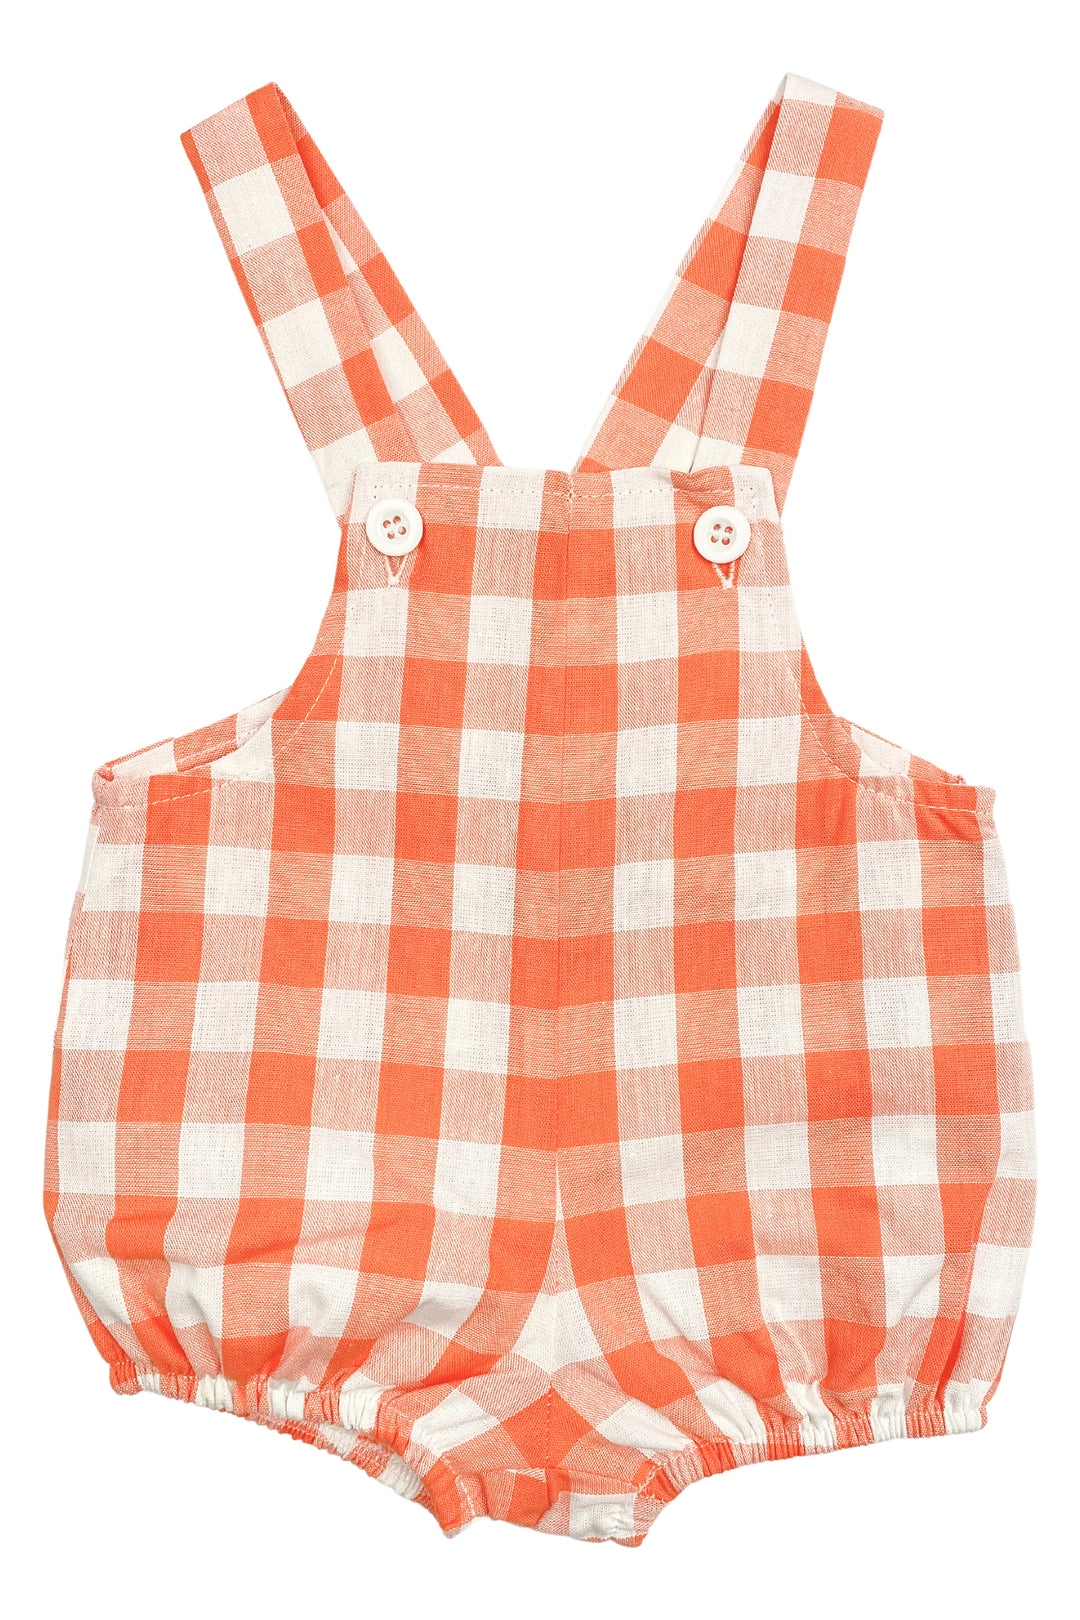 Cocote "Max" Gingham Dungaree Romper | iphoneandroidapplications